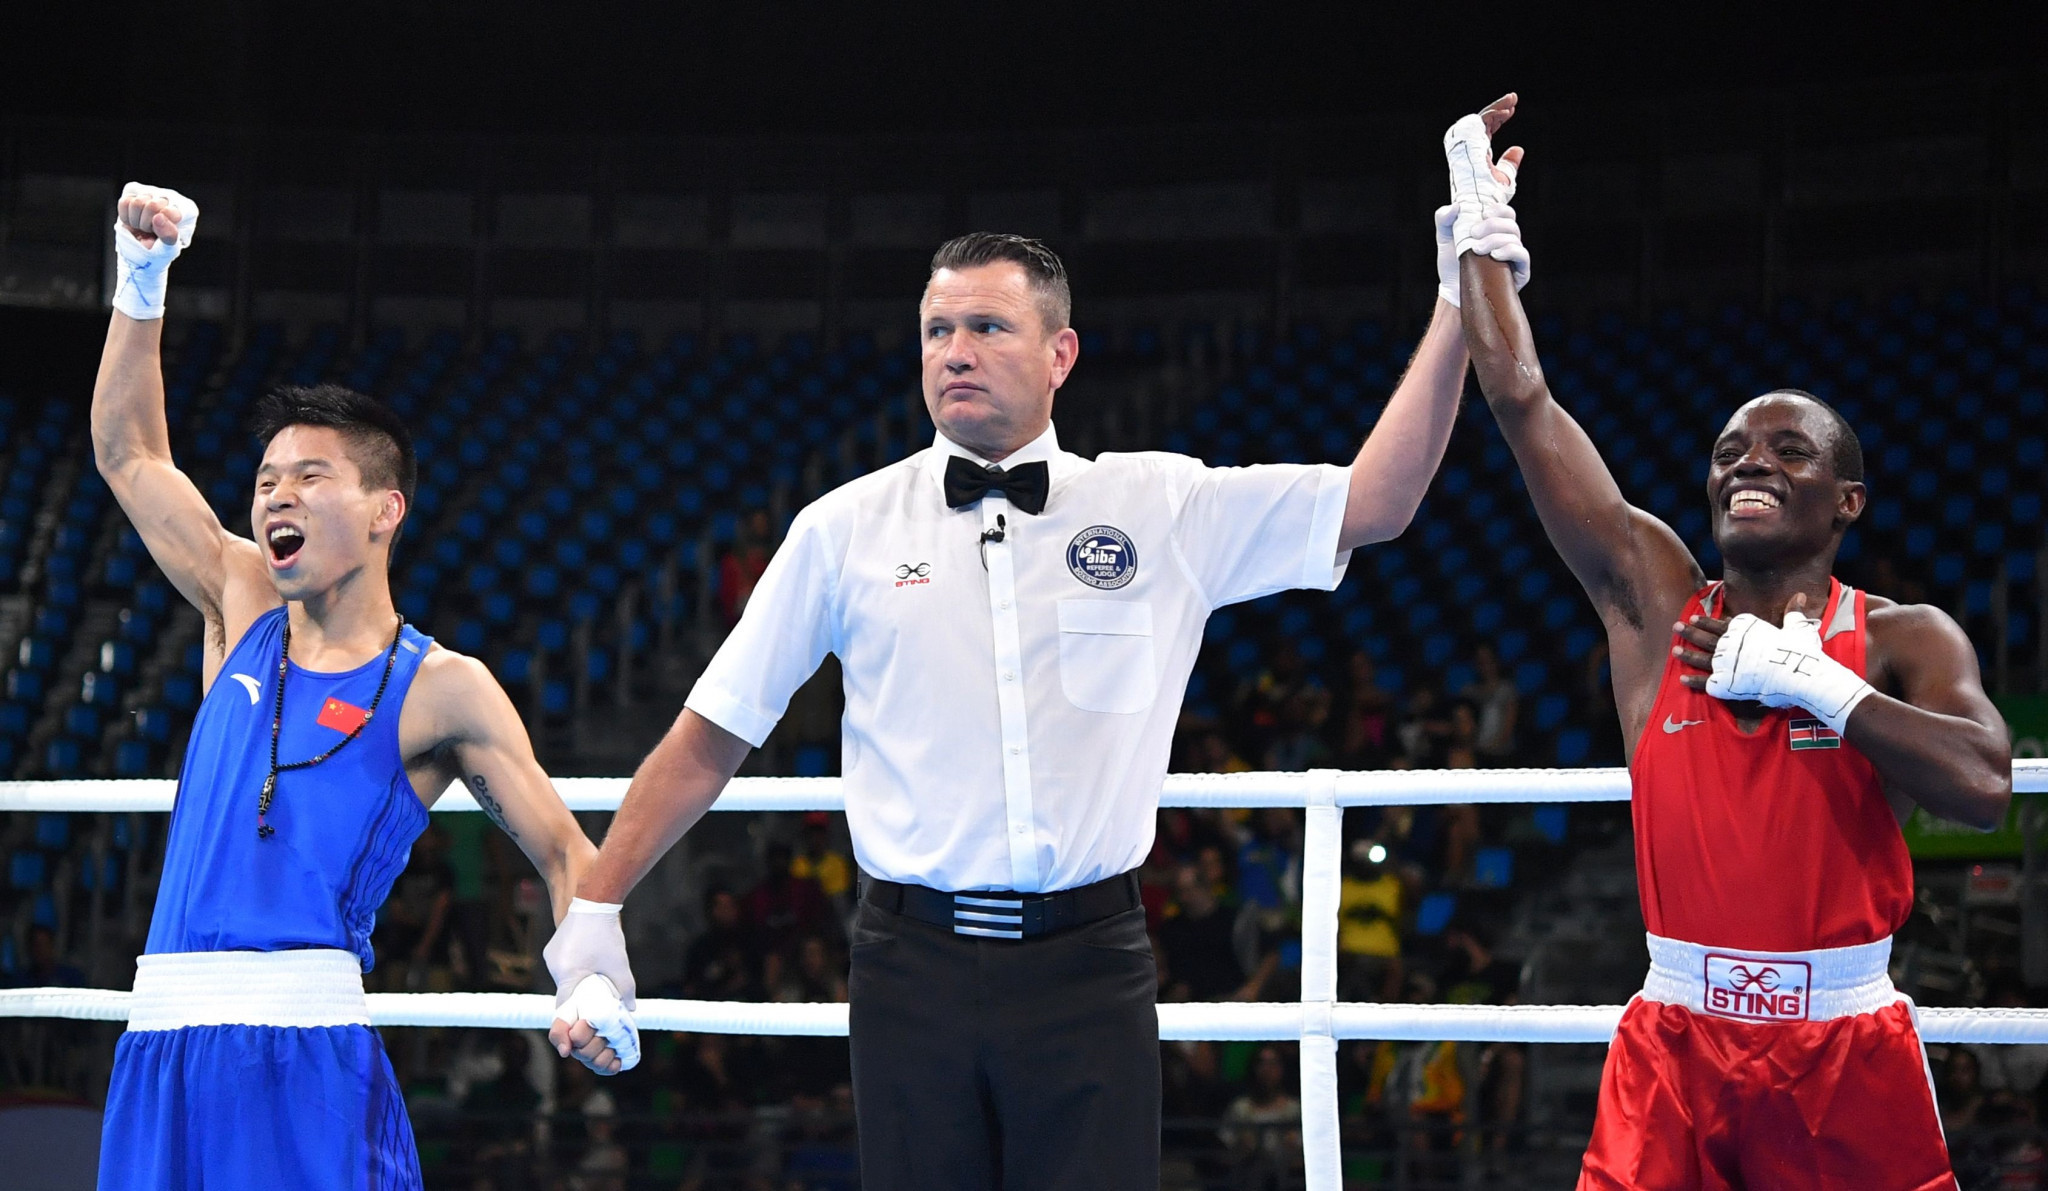 Chinese boxer still hurting after claiming judges "stole" Rio 2016 dream